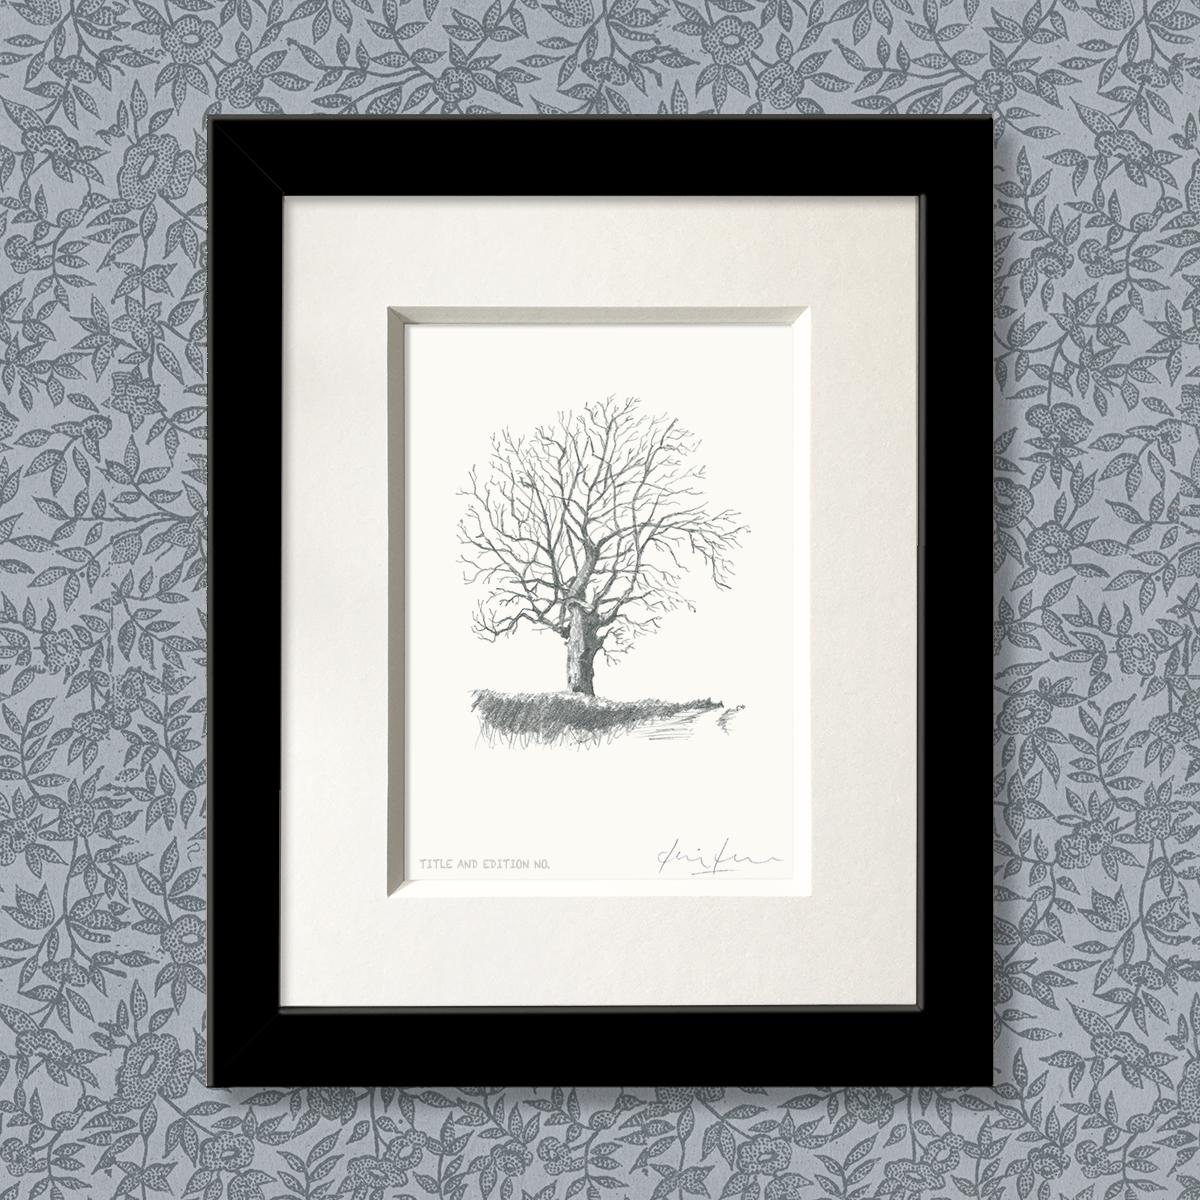 Limited edition print from pencil sketch of a tree in a black frame